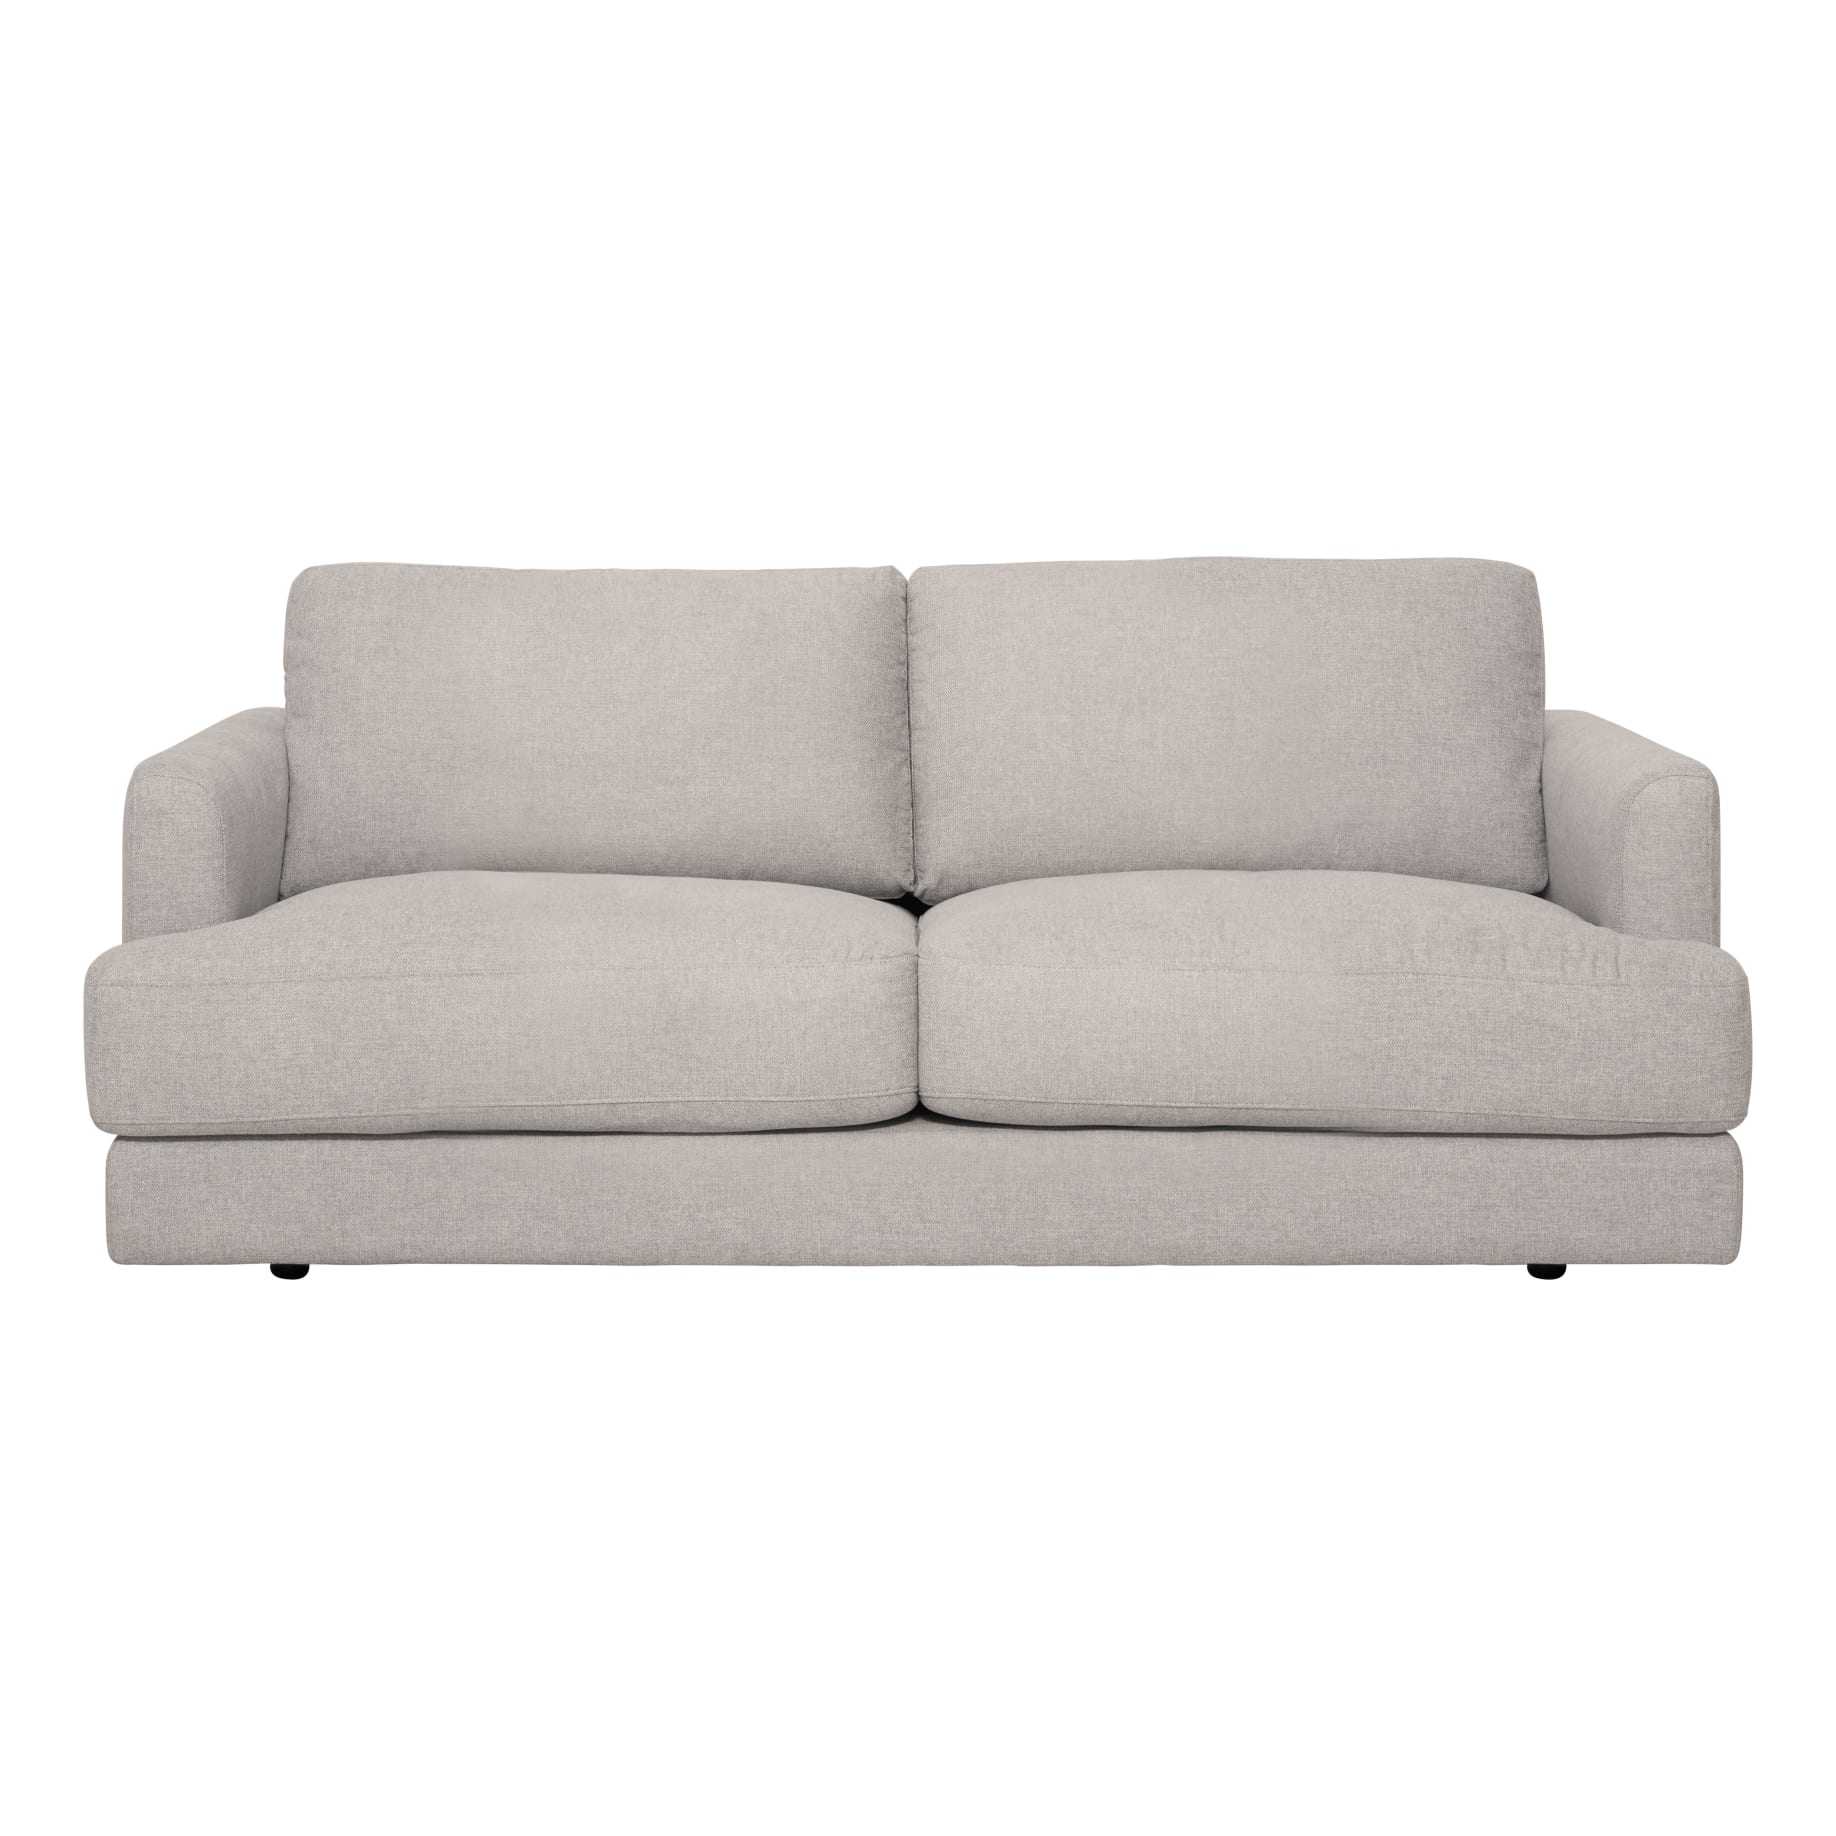 Temple 3 Seater Sofa with 2 Cushions in Belfast Beige